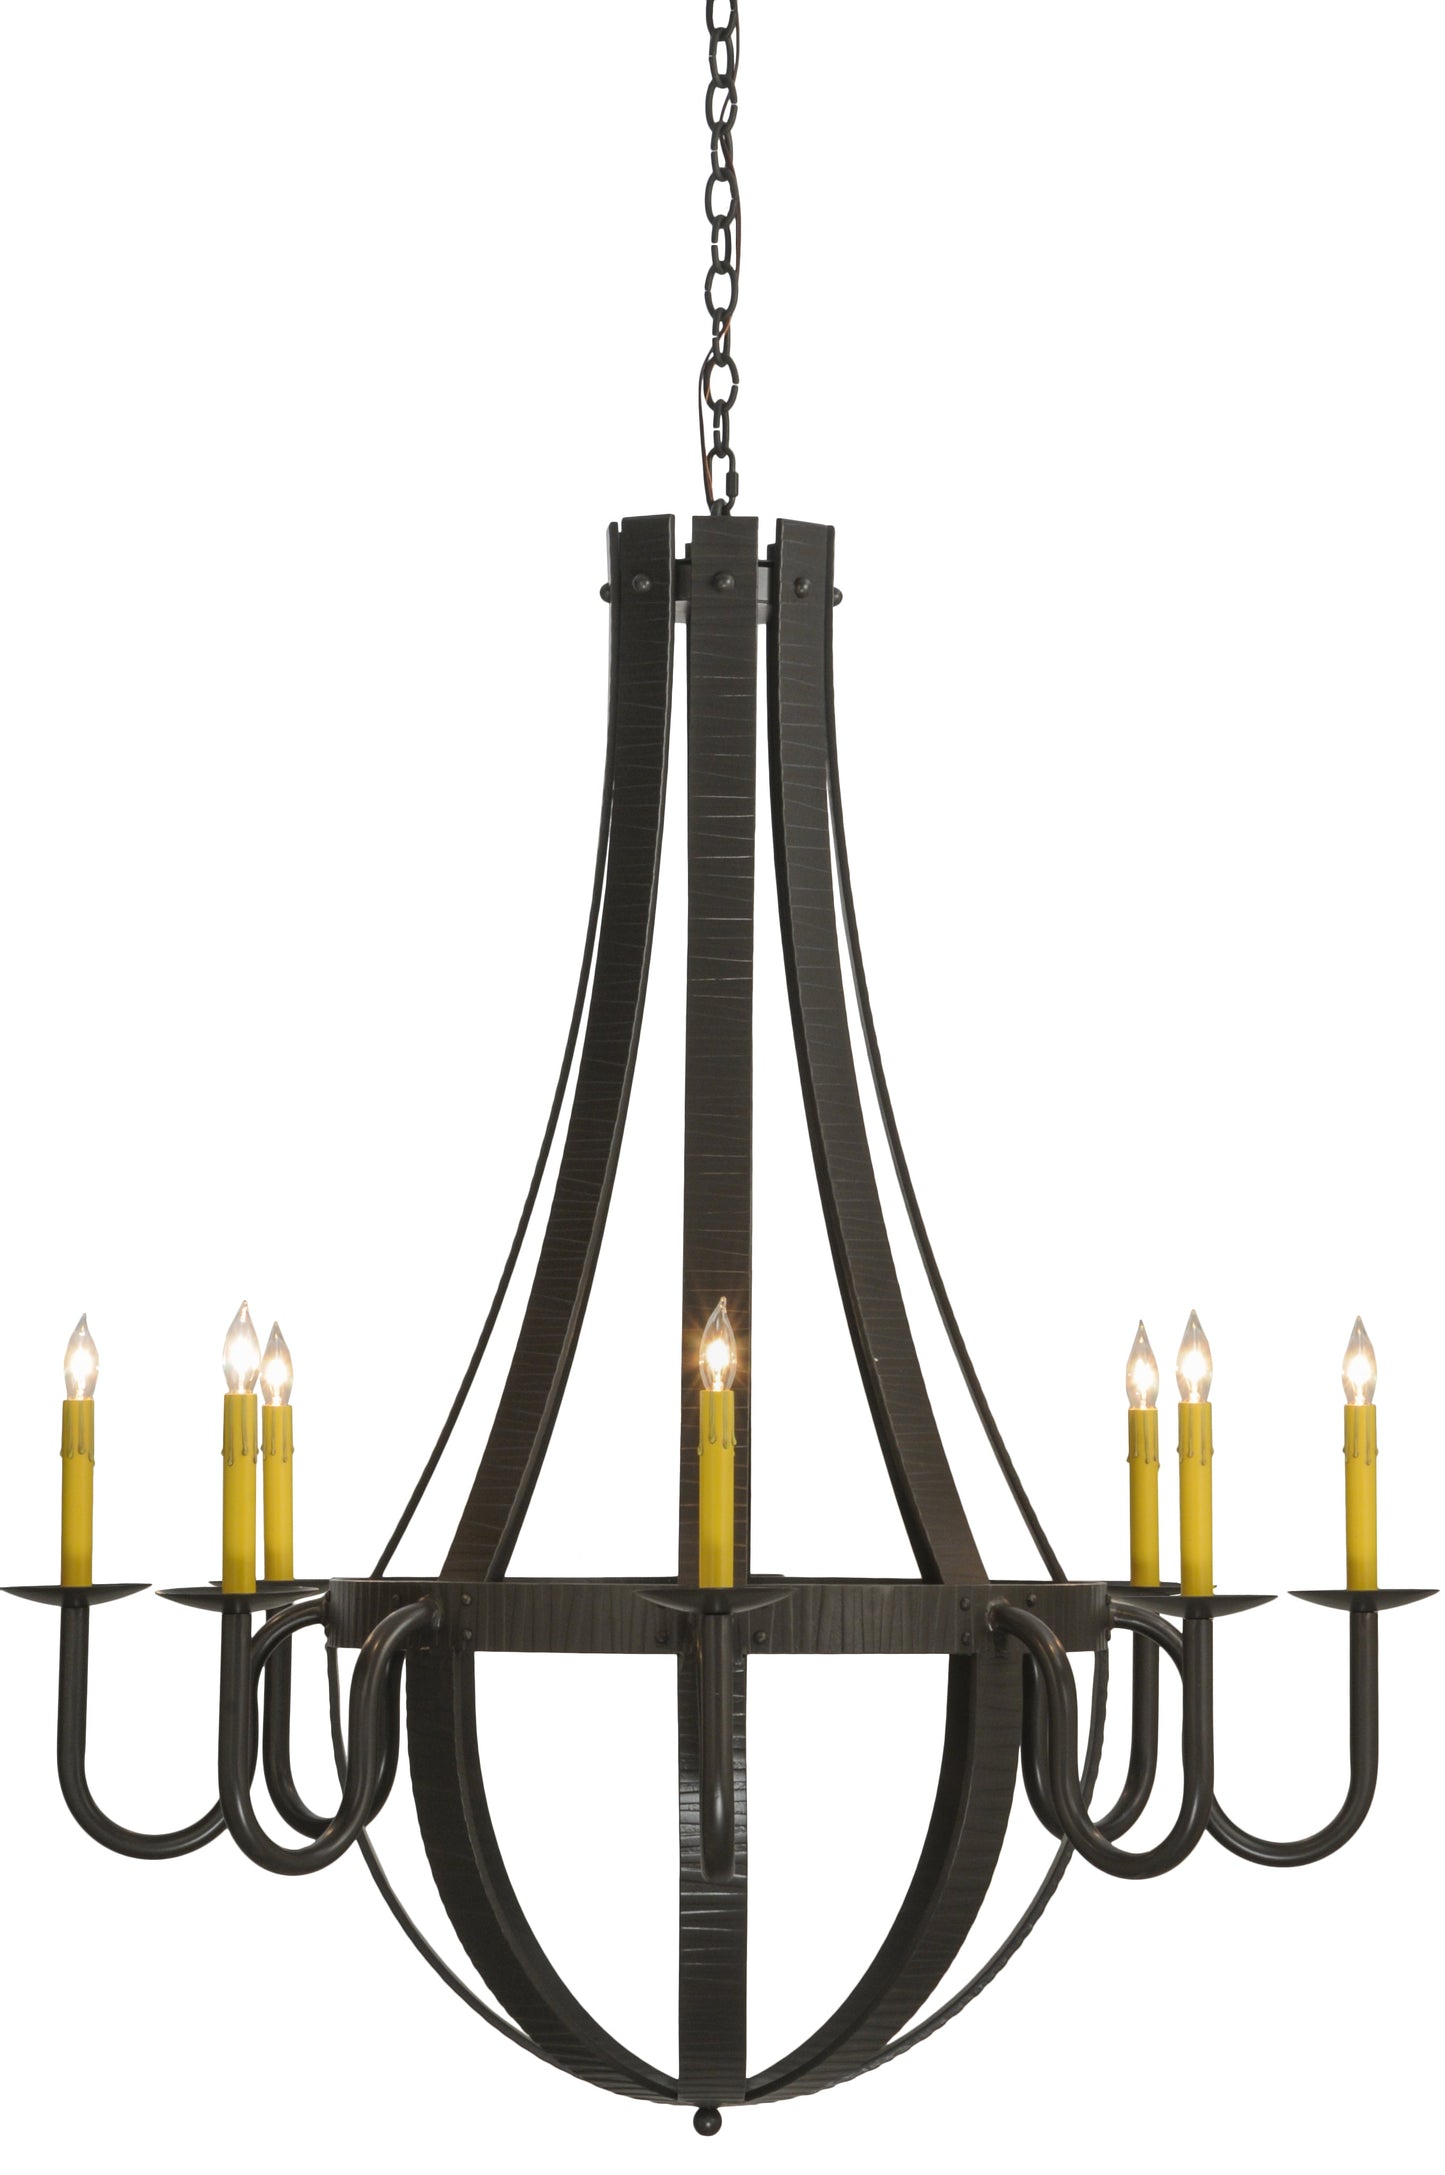 42" Barrel Stave Metallo 8-Light Chandelier by 2nd Ave Lighting